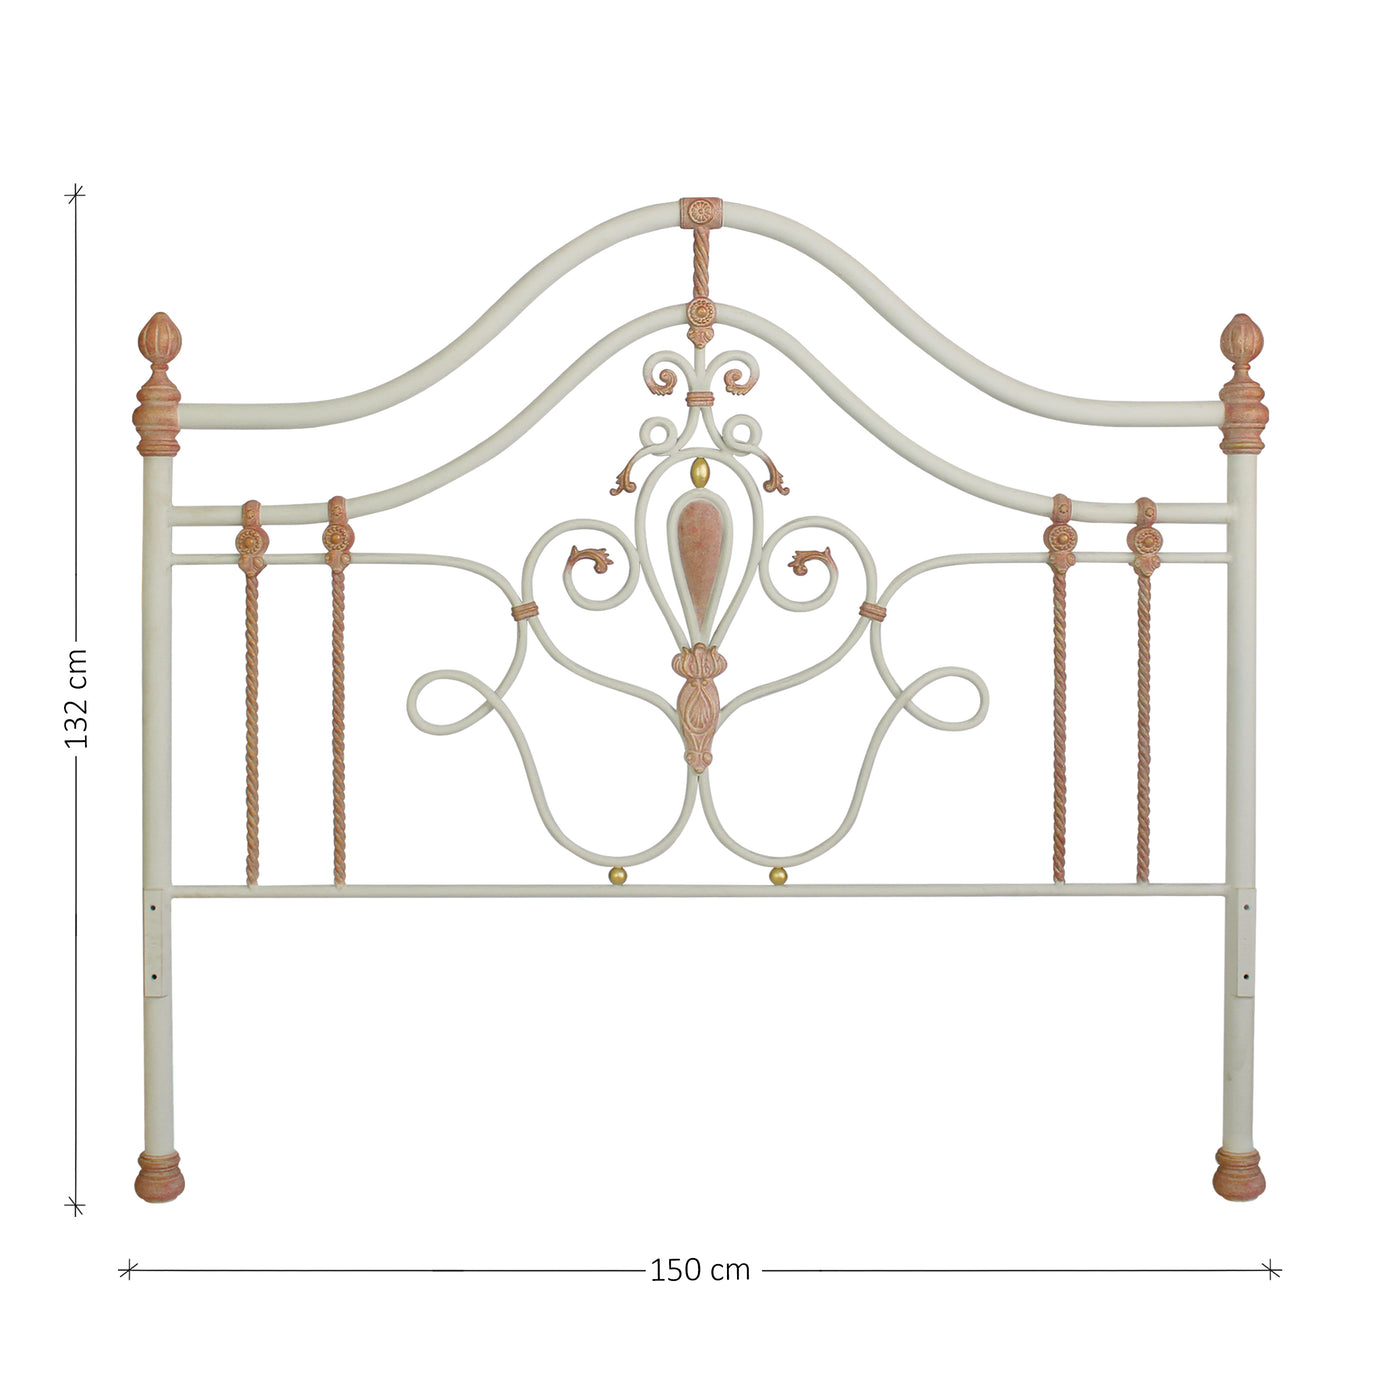 Wrought iron headboard for girls single bed with scrolls, leaves and motifs; with annotated dimensions